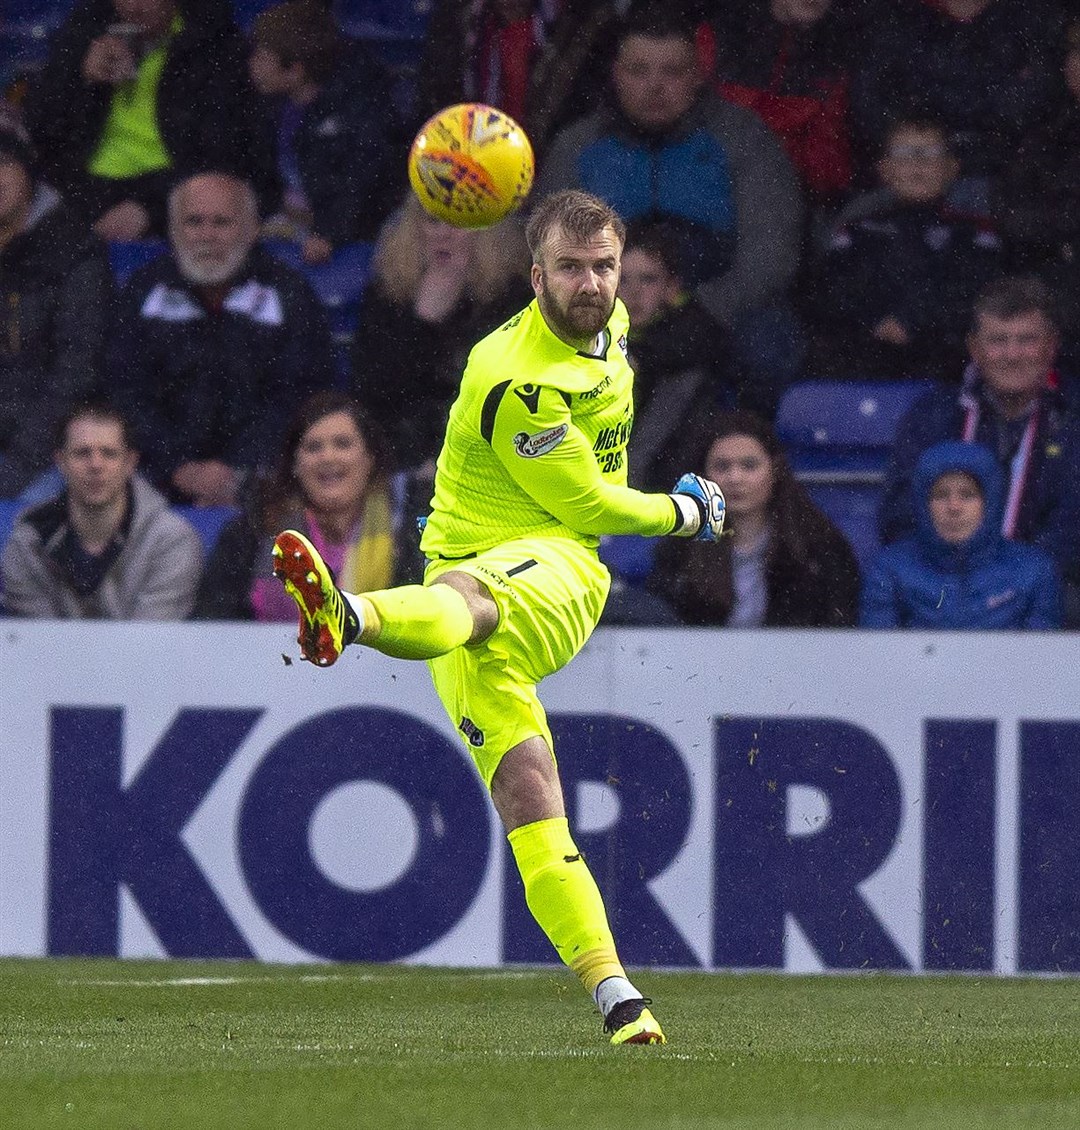 Goalkeeper Scott Fox has left Ross County after failing to agree a new contract.